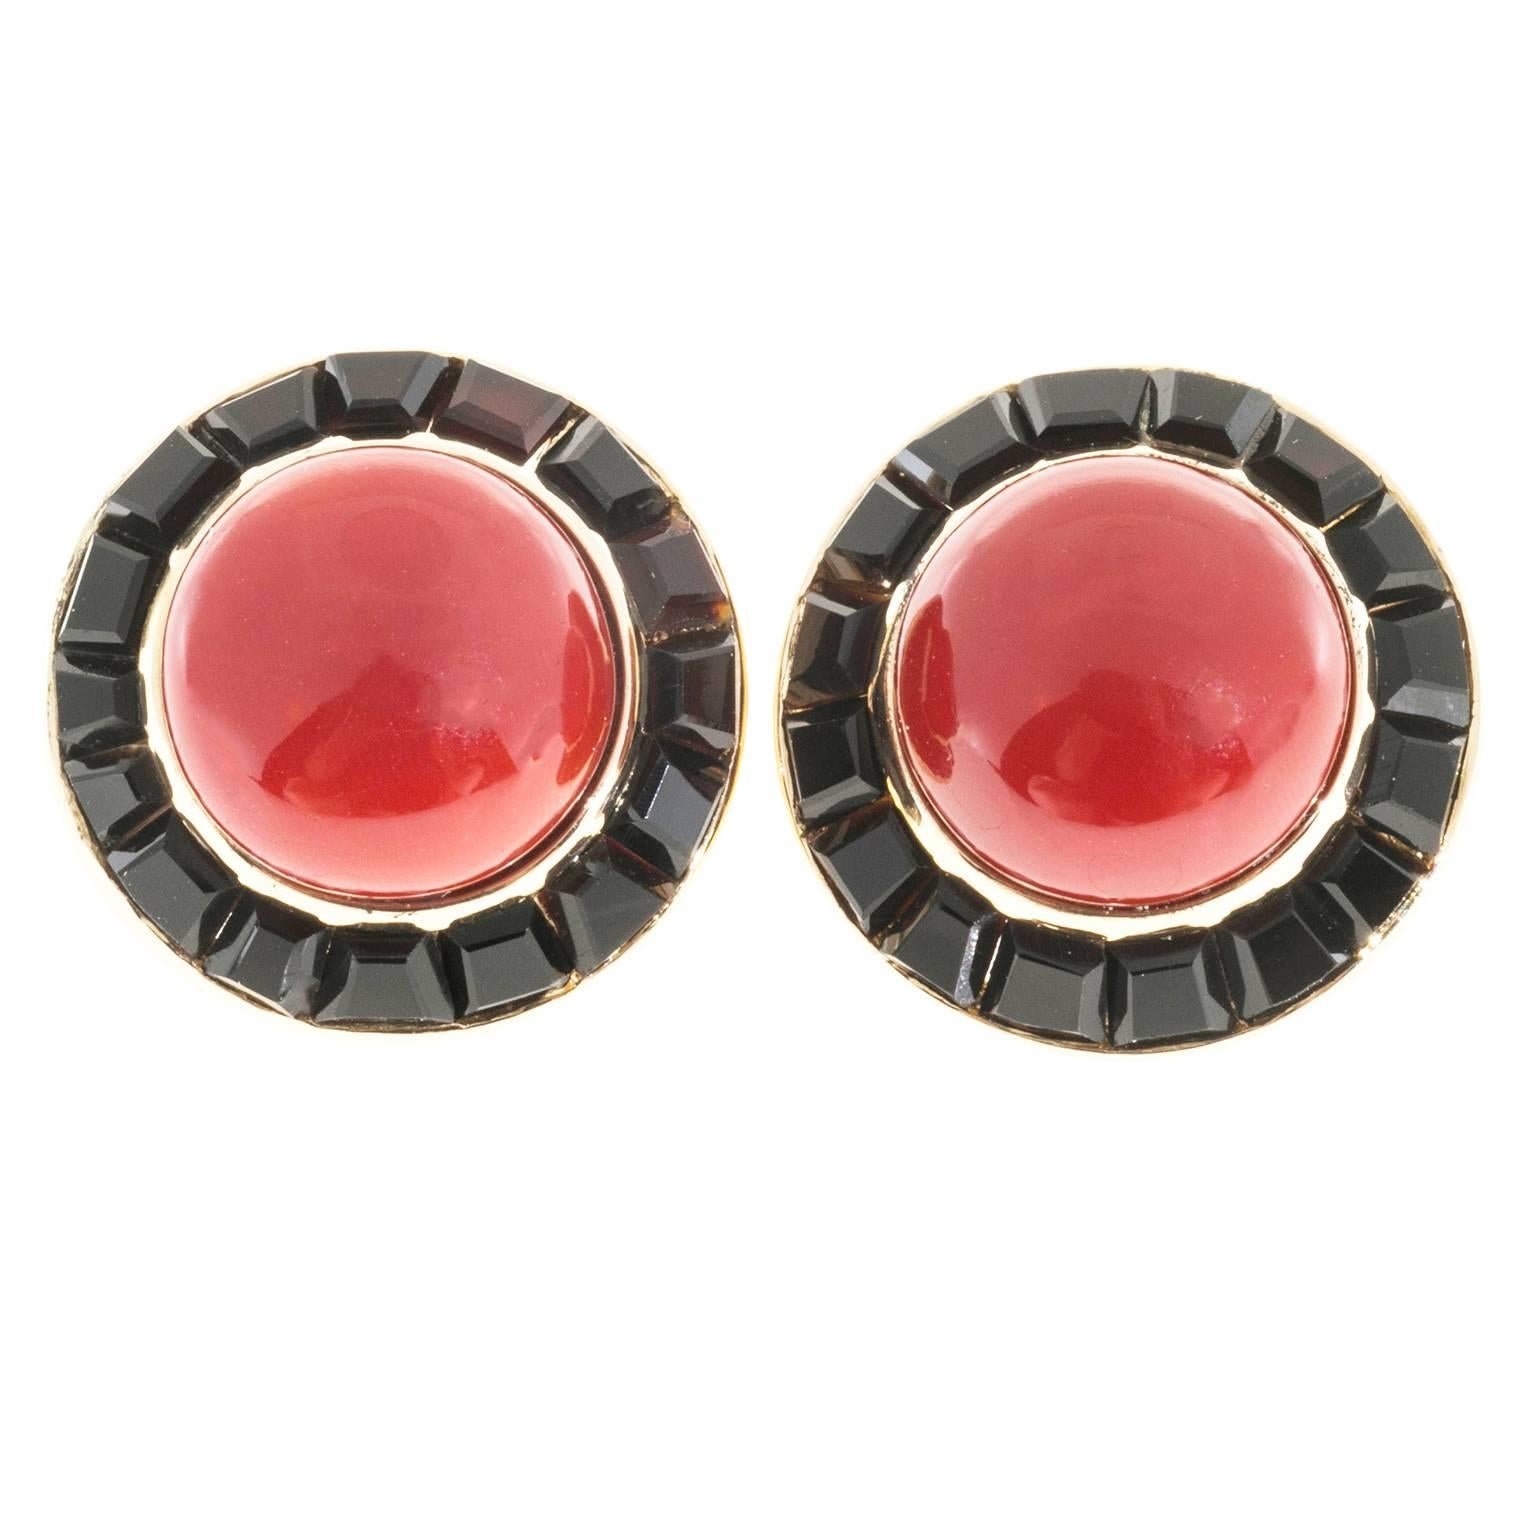 Cabochon Red Coral Black Onyx Gold Earrings 